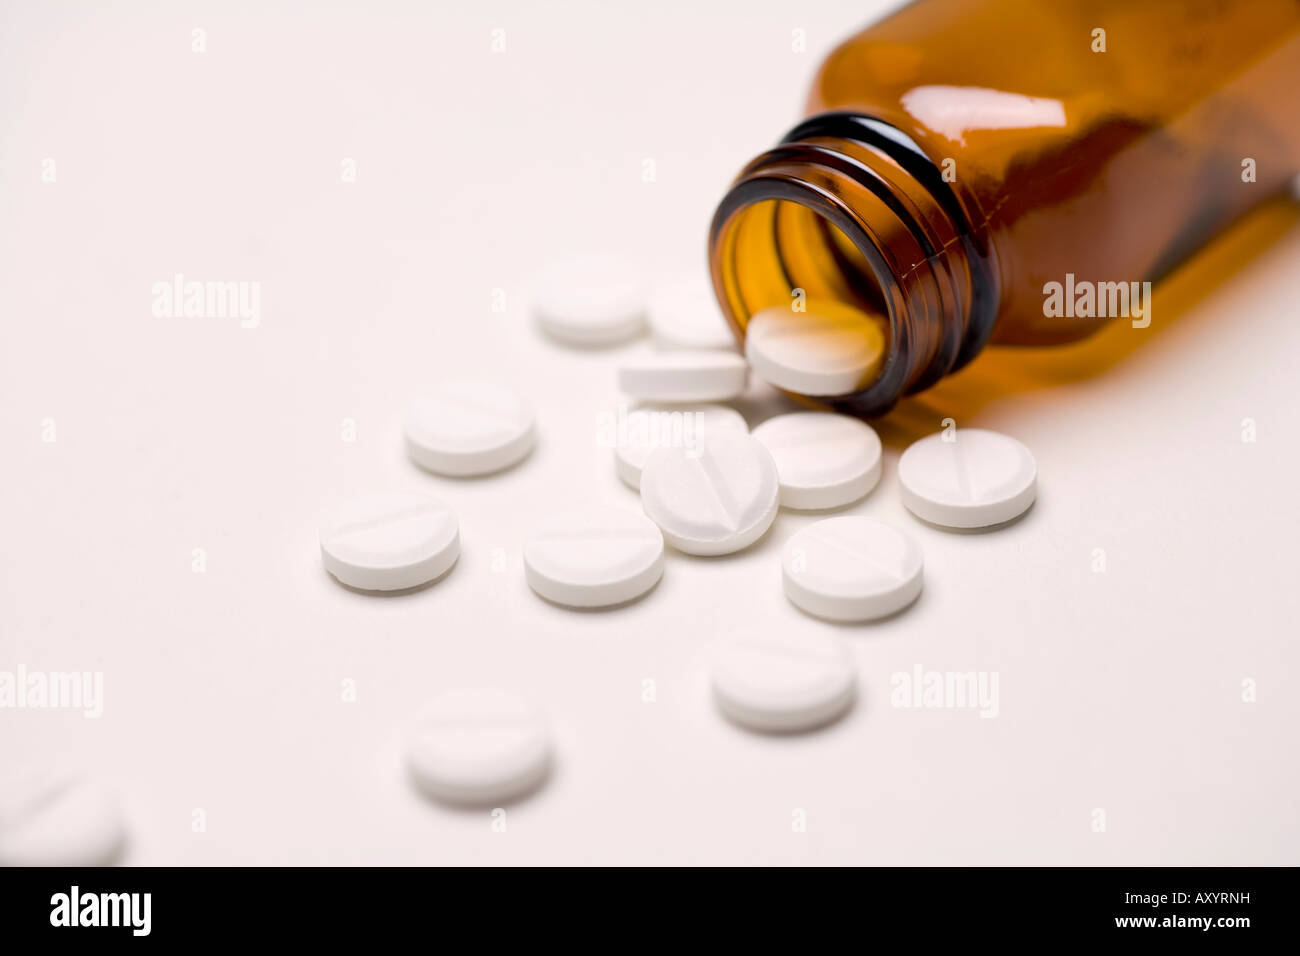 Pills drugs or tablets spilling out of a brown glass medicine bottle  aspirin or paracetamol painkillers Stock Photo - Alamy